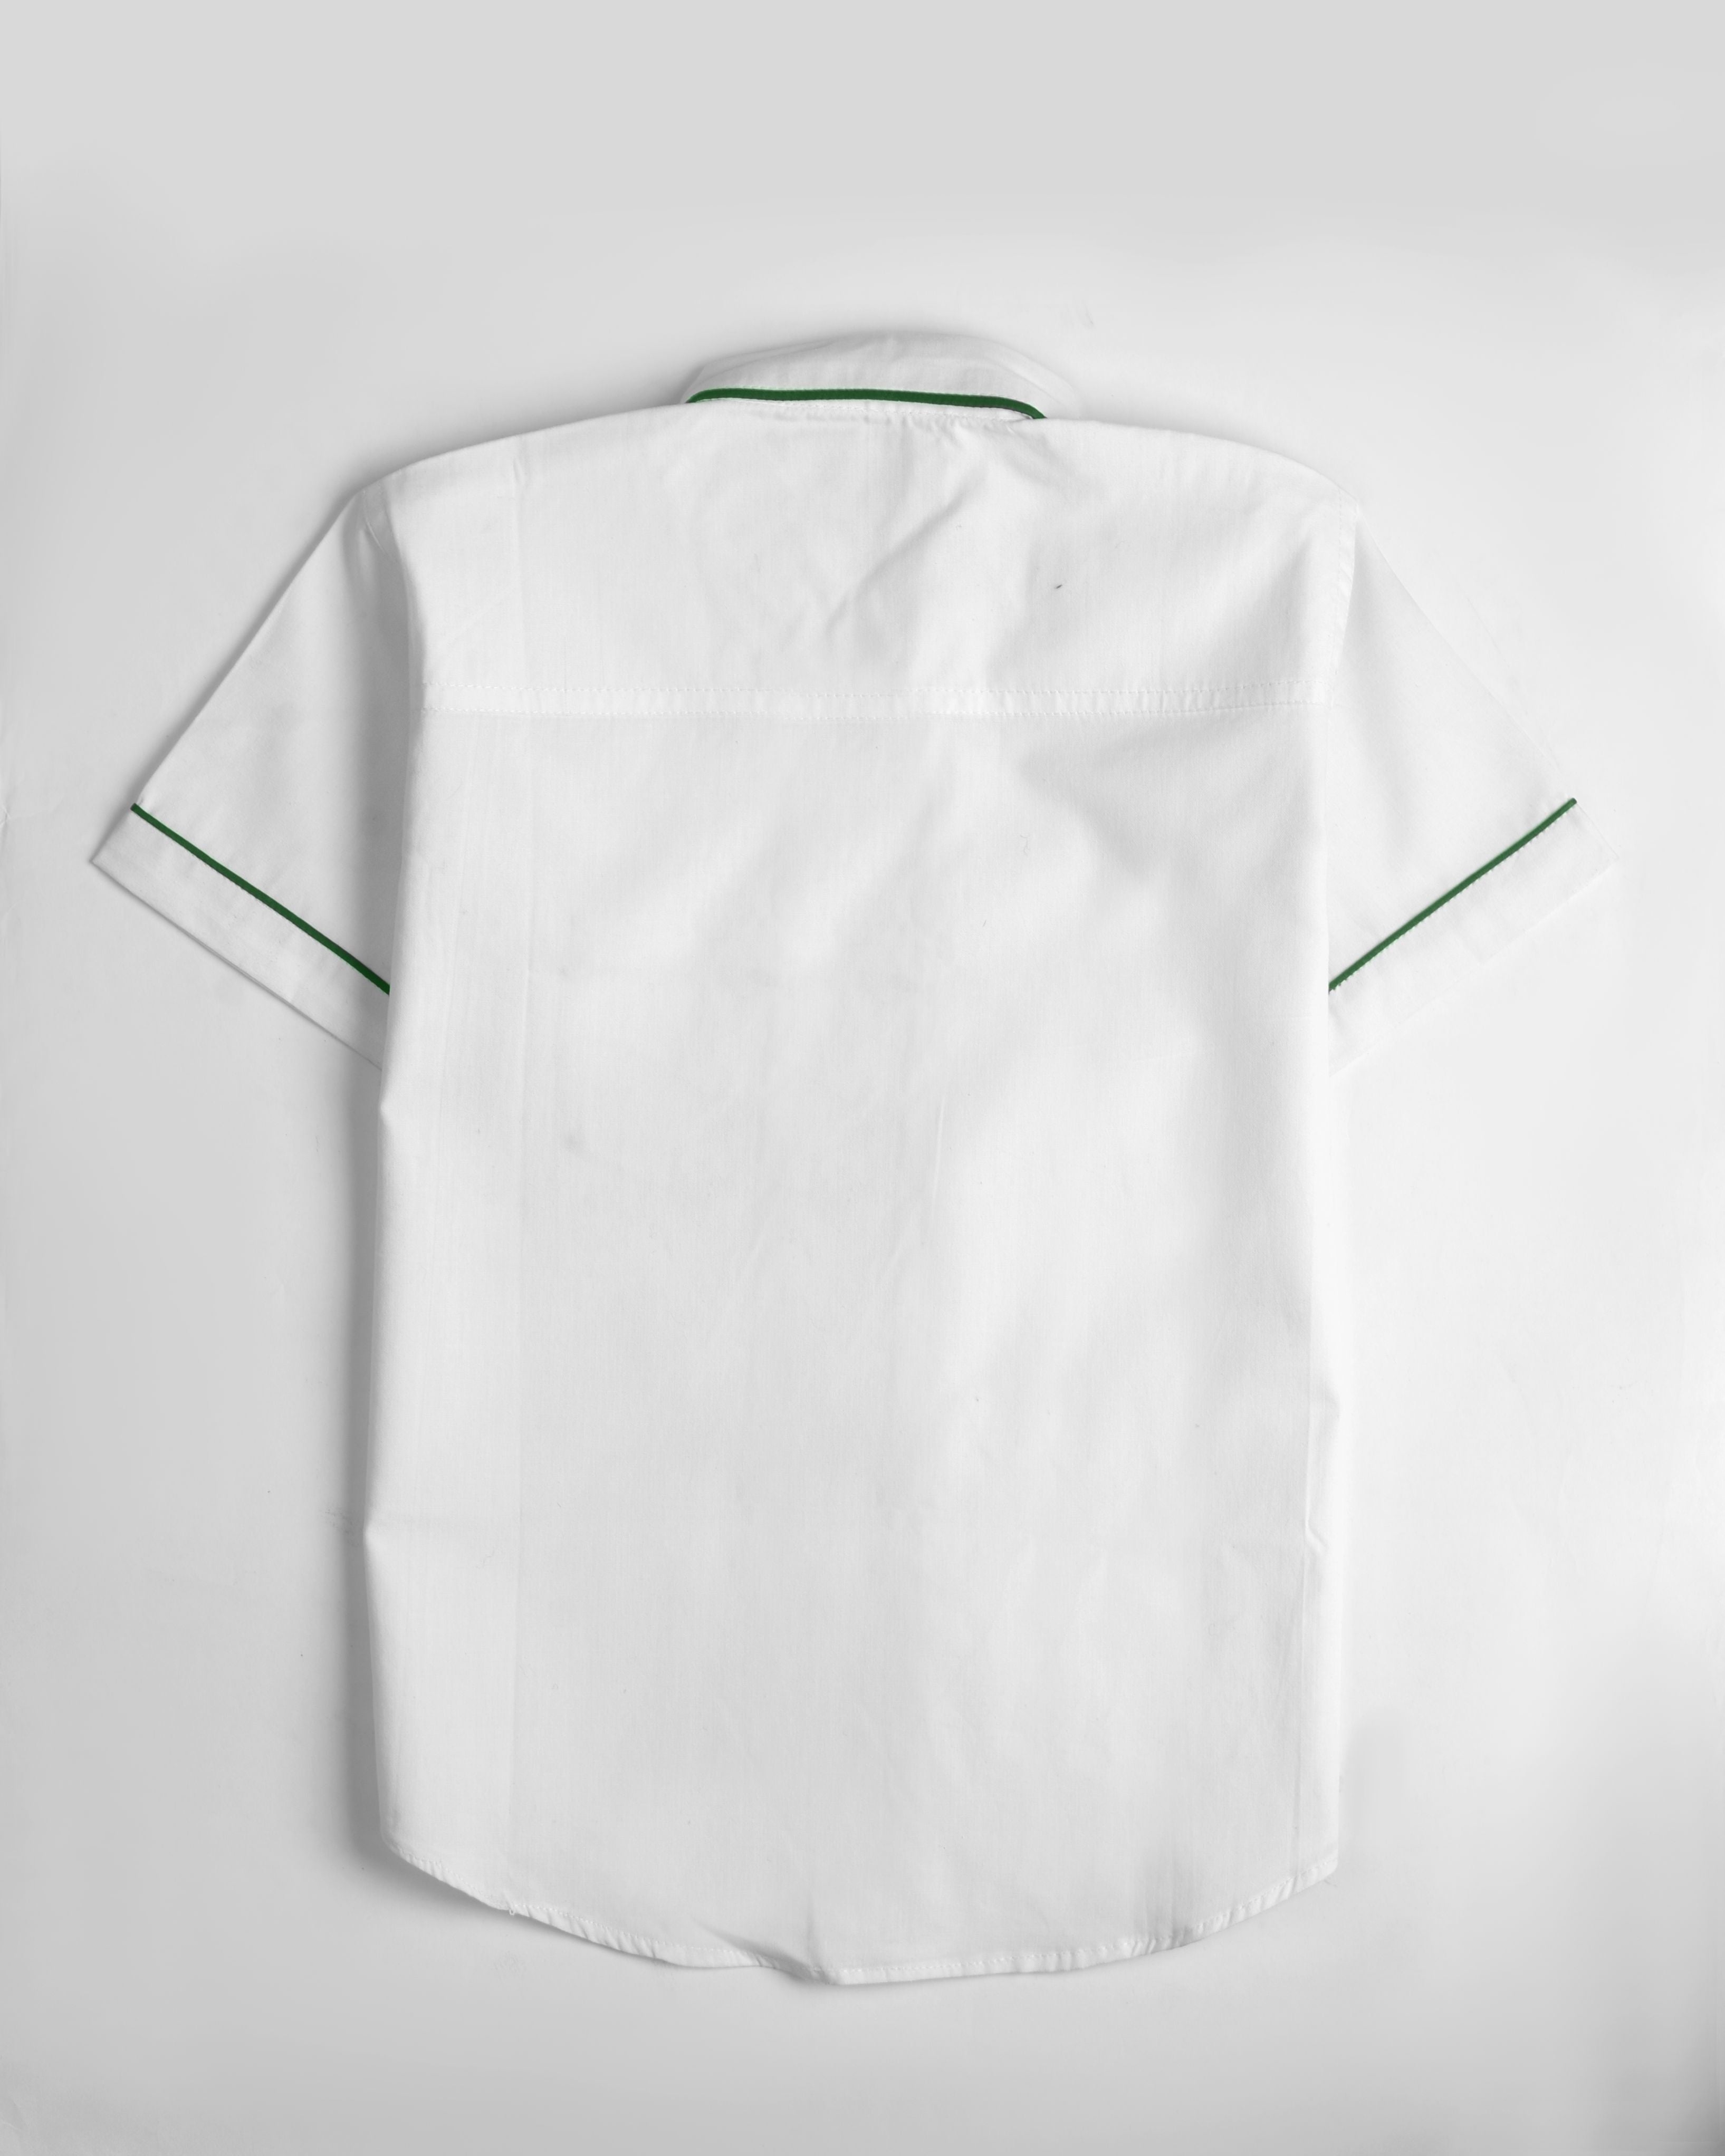 White Half Sleeves shirt with Green detailings